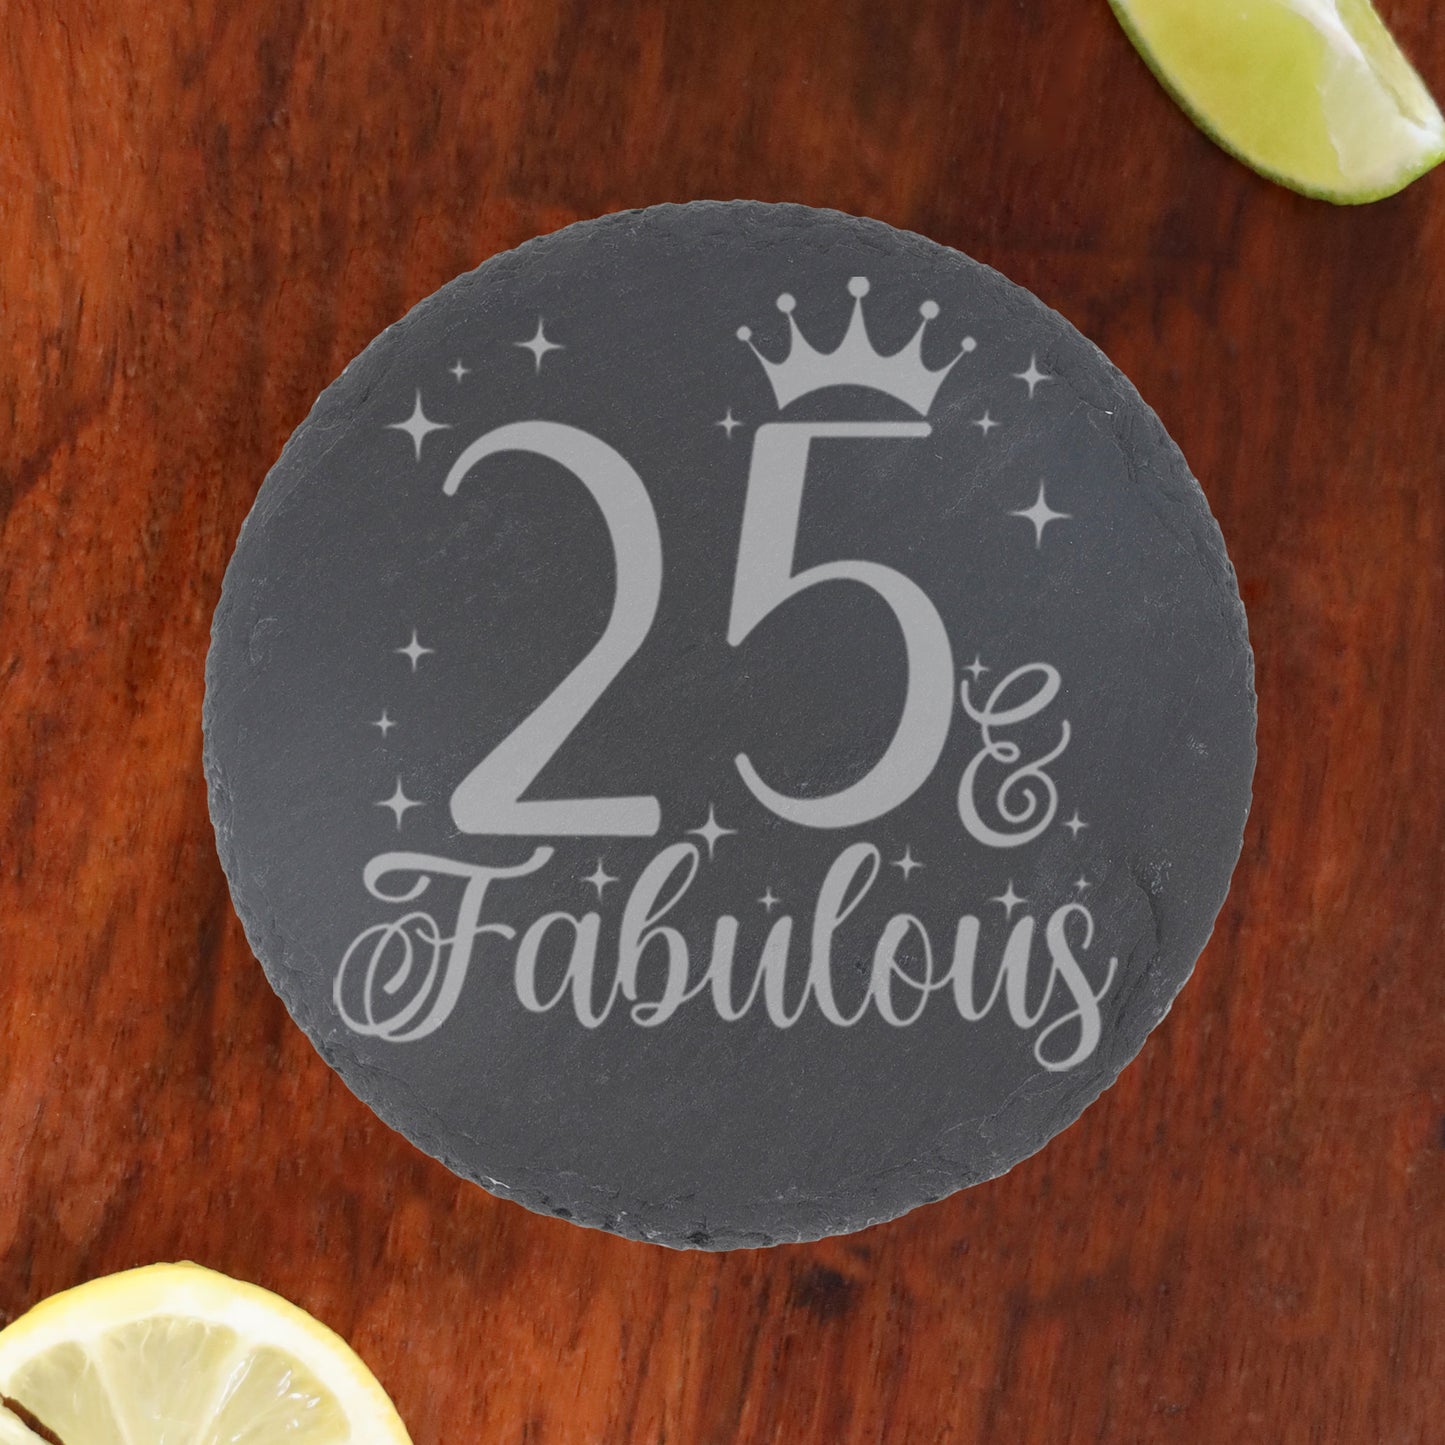 25 & Fabulous 25th Birthday Gift Engraved Wine Glass and/or Coaster Set  - Always Looking Good - Round Coaster Only  